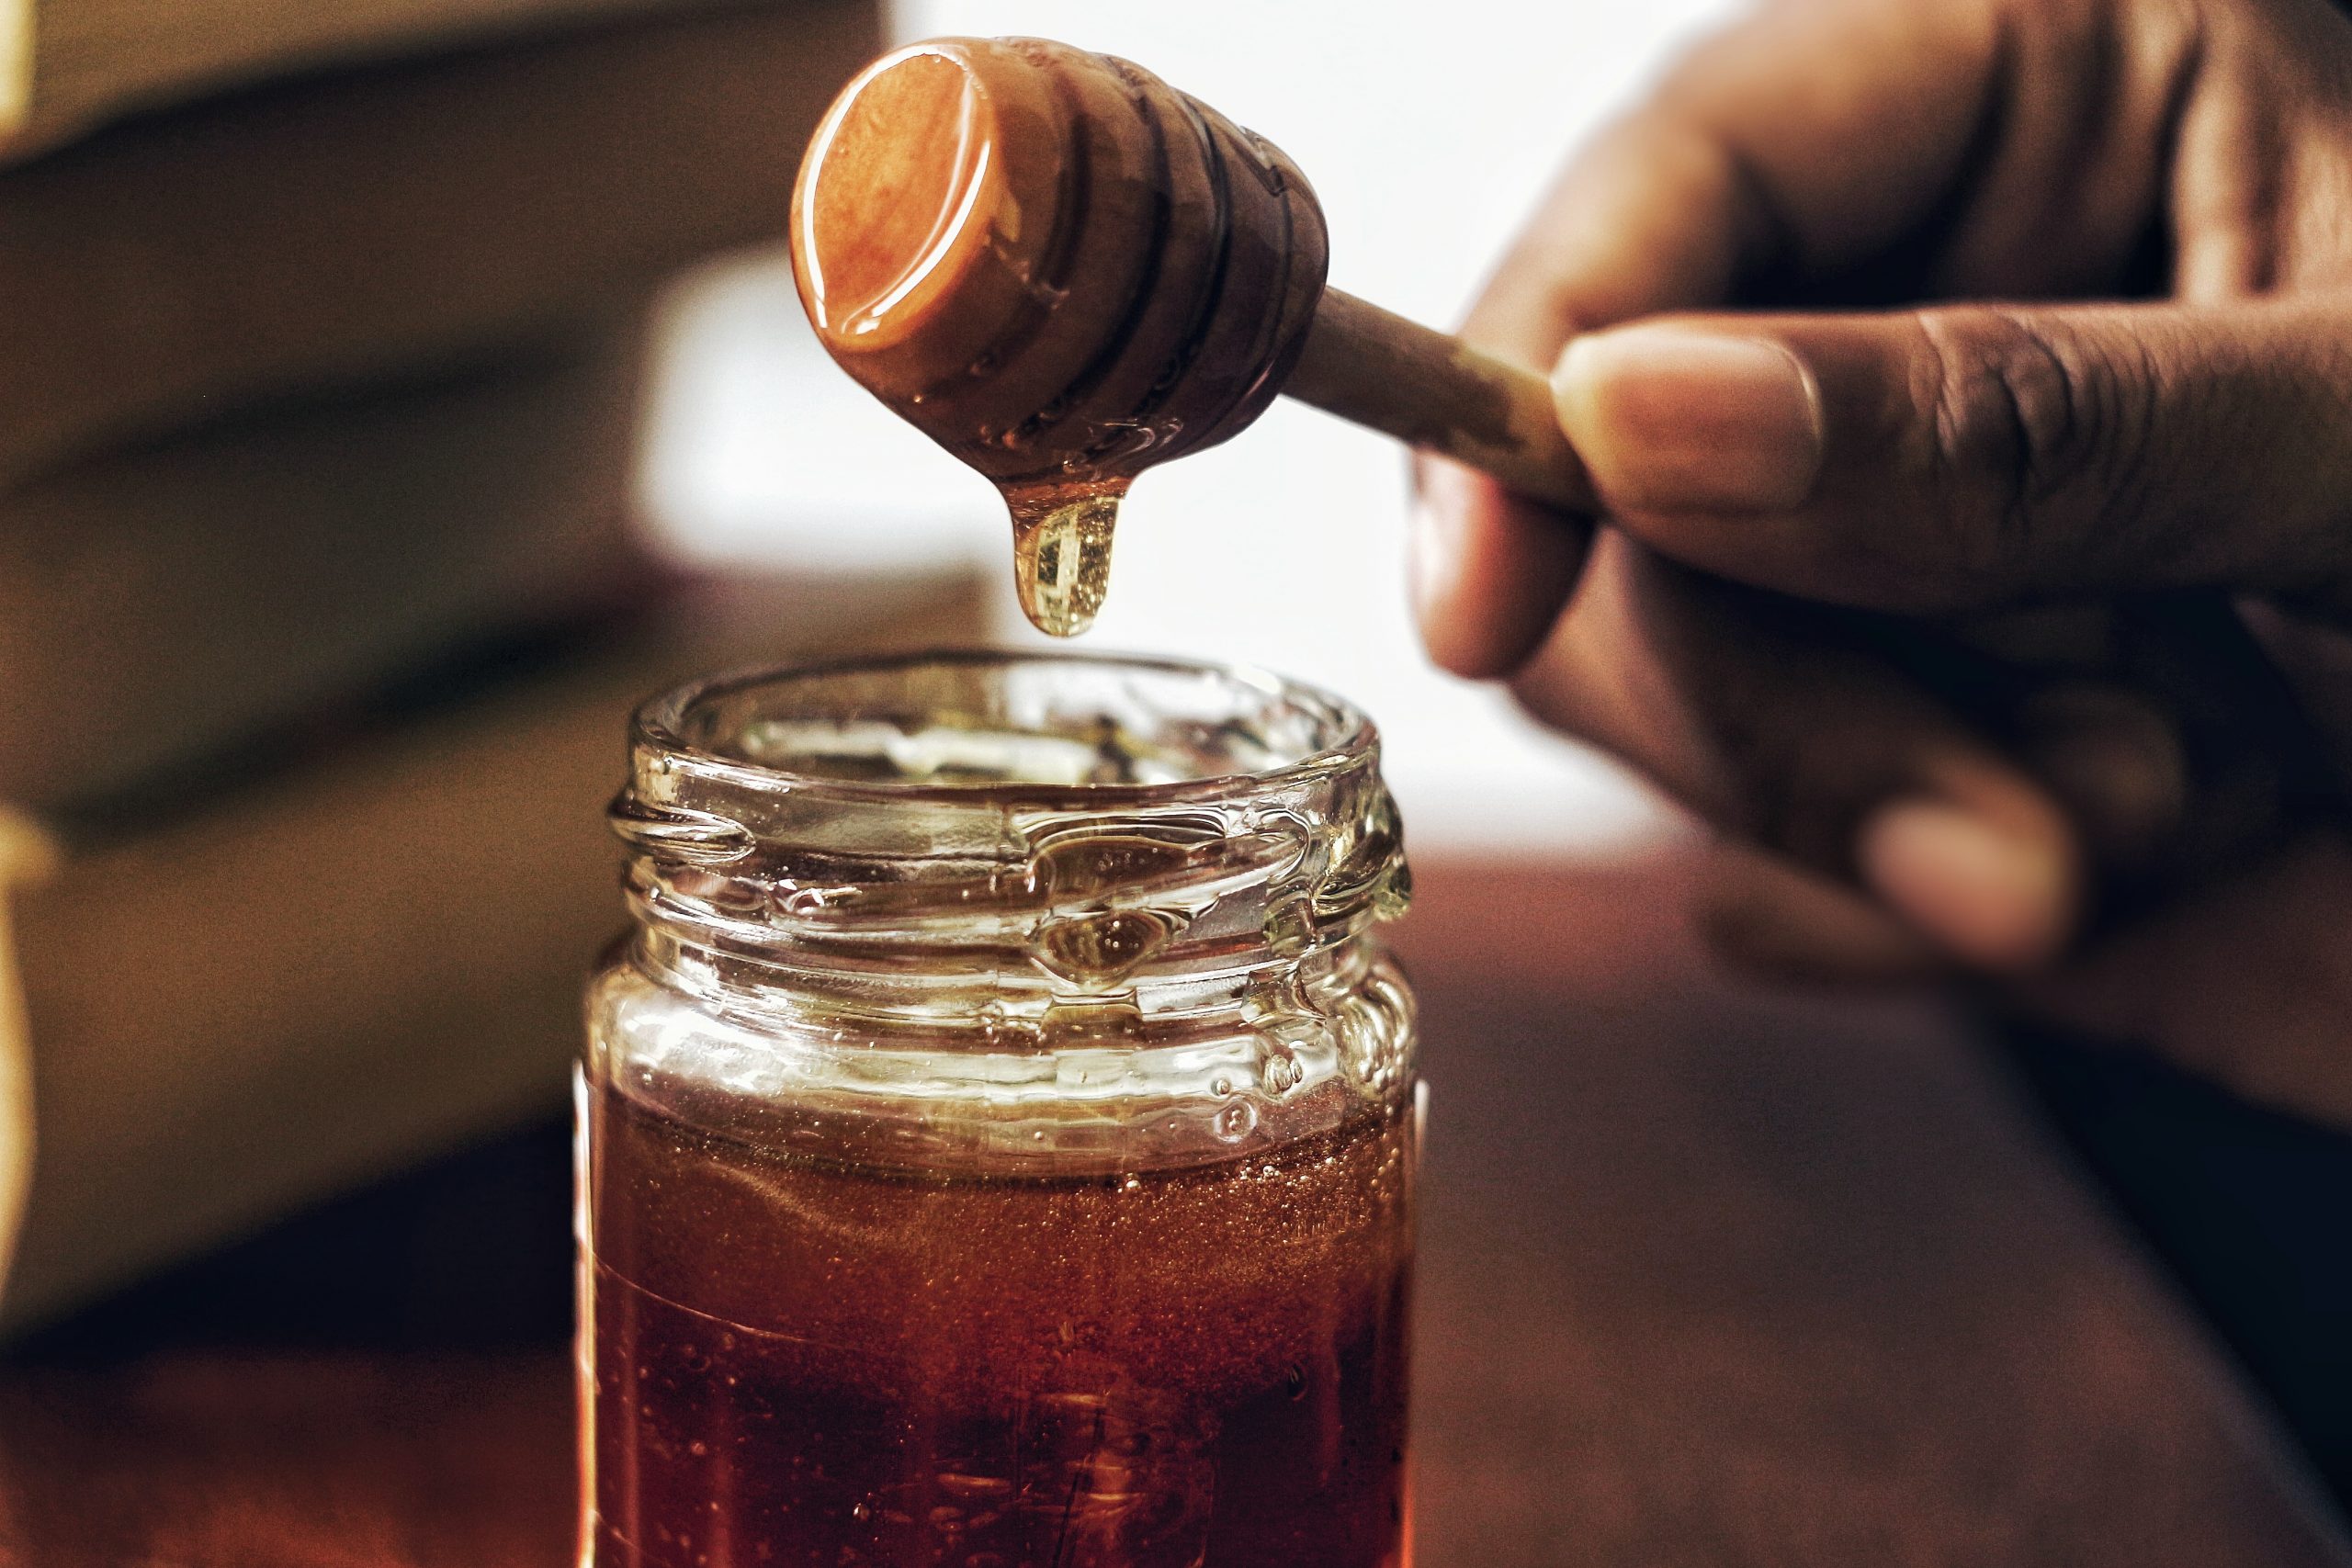 Honey are naturally rich in simple carbohydrates